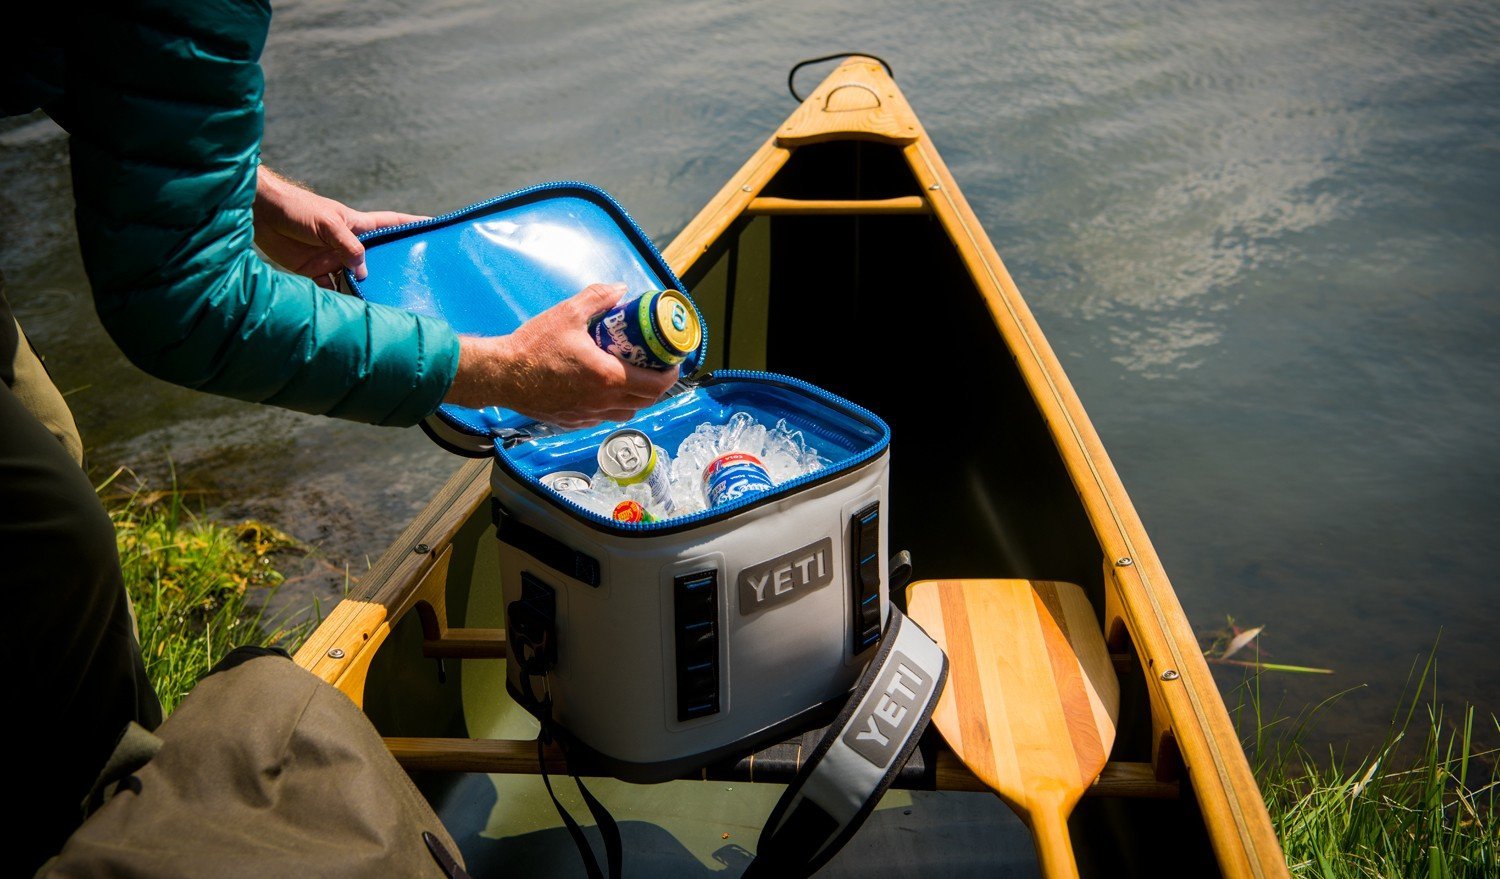 YETI Coolers - Worth It? Or Just Hype? Pros, Cons & MUCH Cheaper Yeti Cooler Alternatives